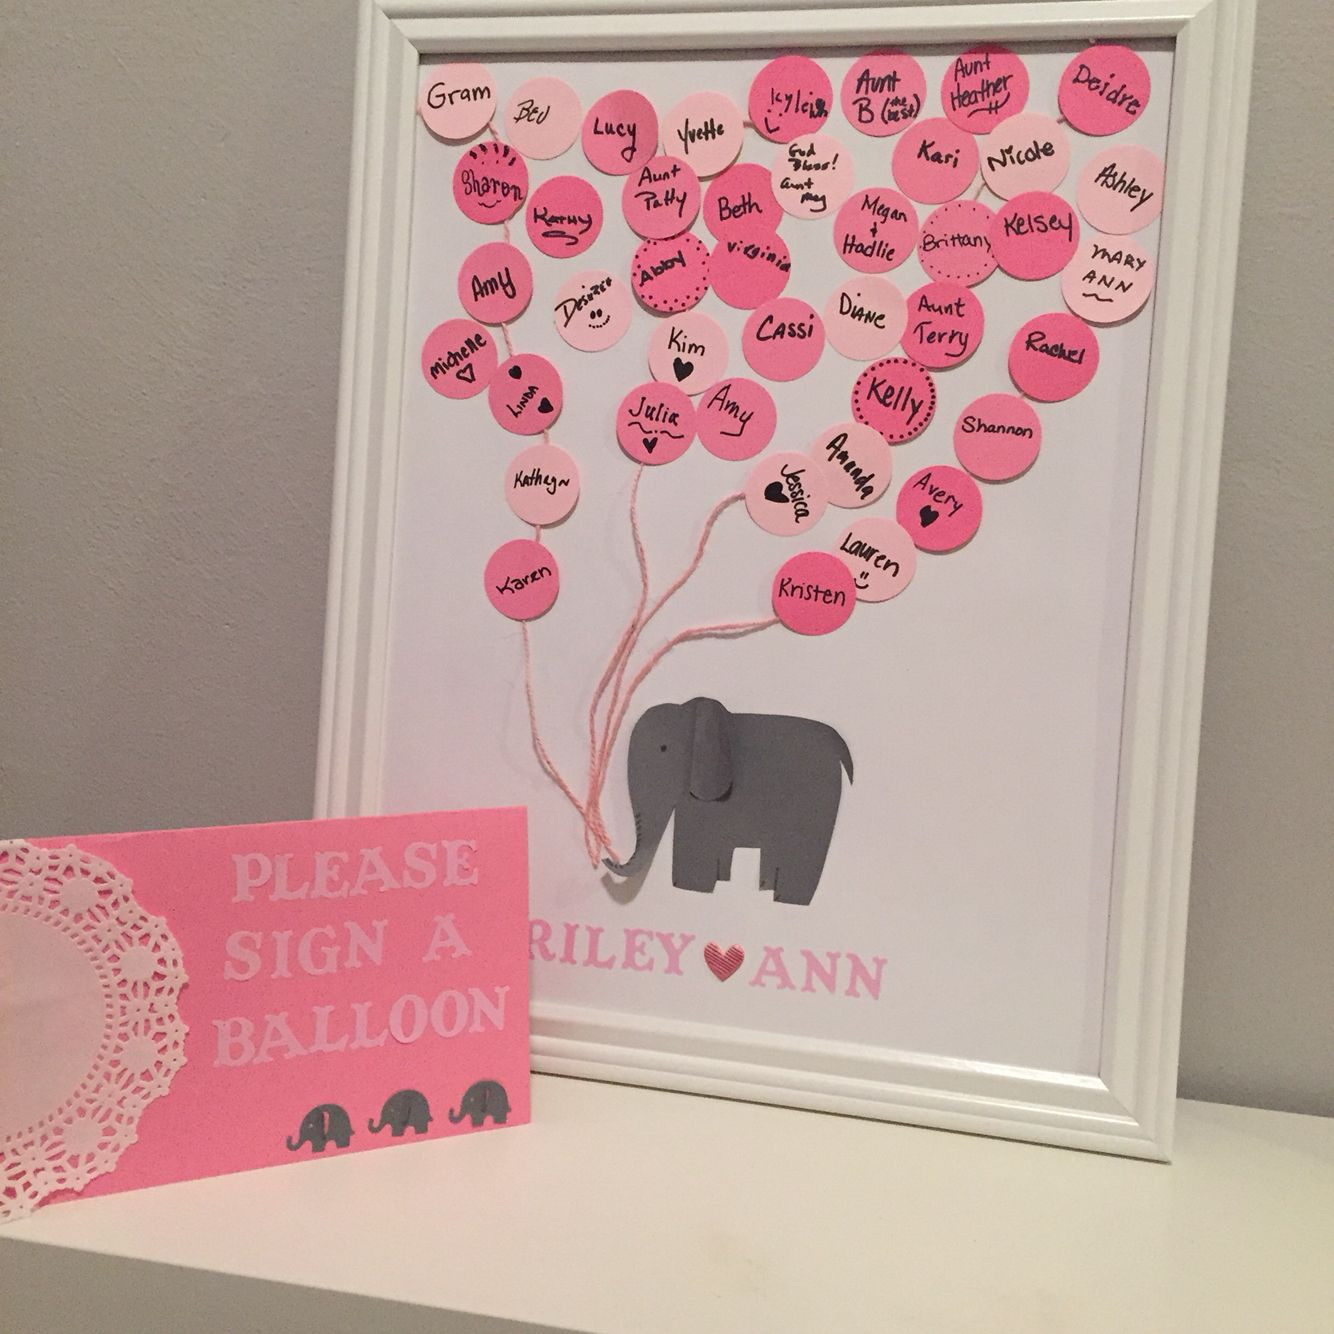 Elephant Baby Gift Ideas
 Diy baby shower guest book Elephant themed for our baby